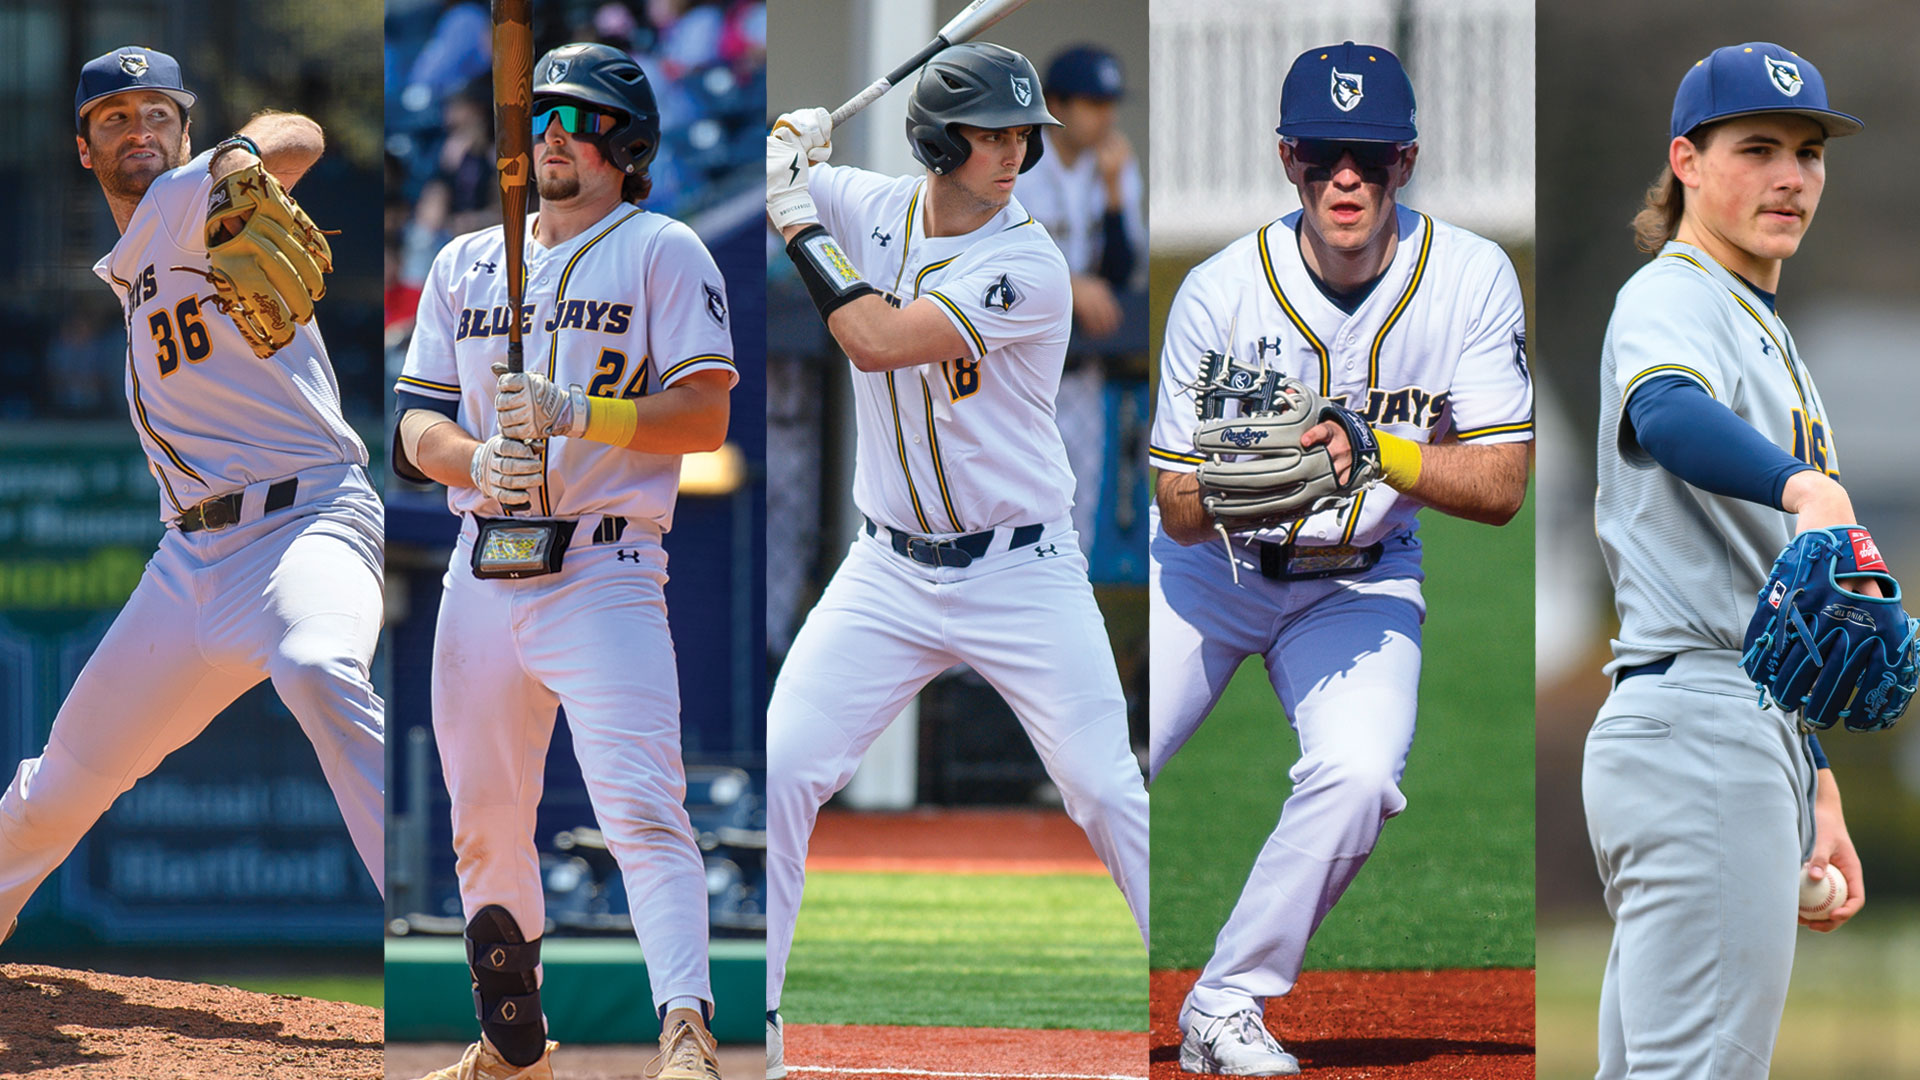 Five From Baseball Earn All-Conference Honors